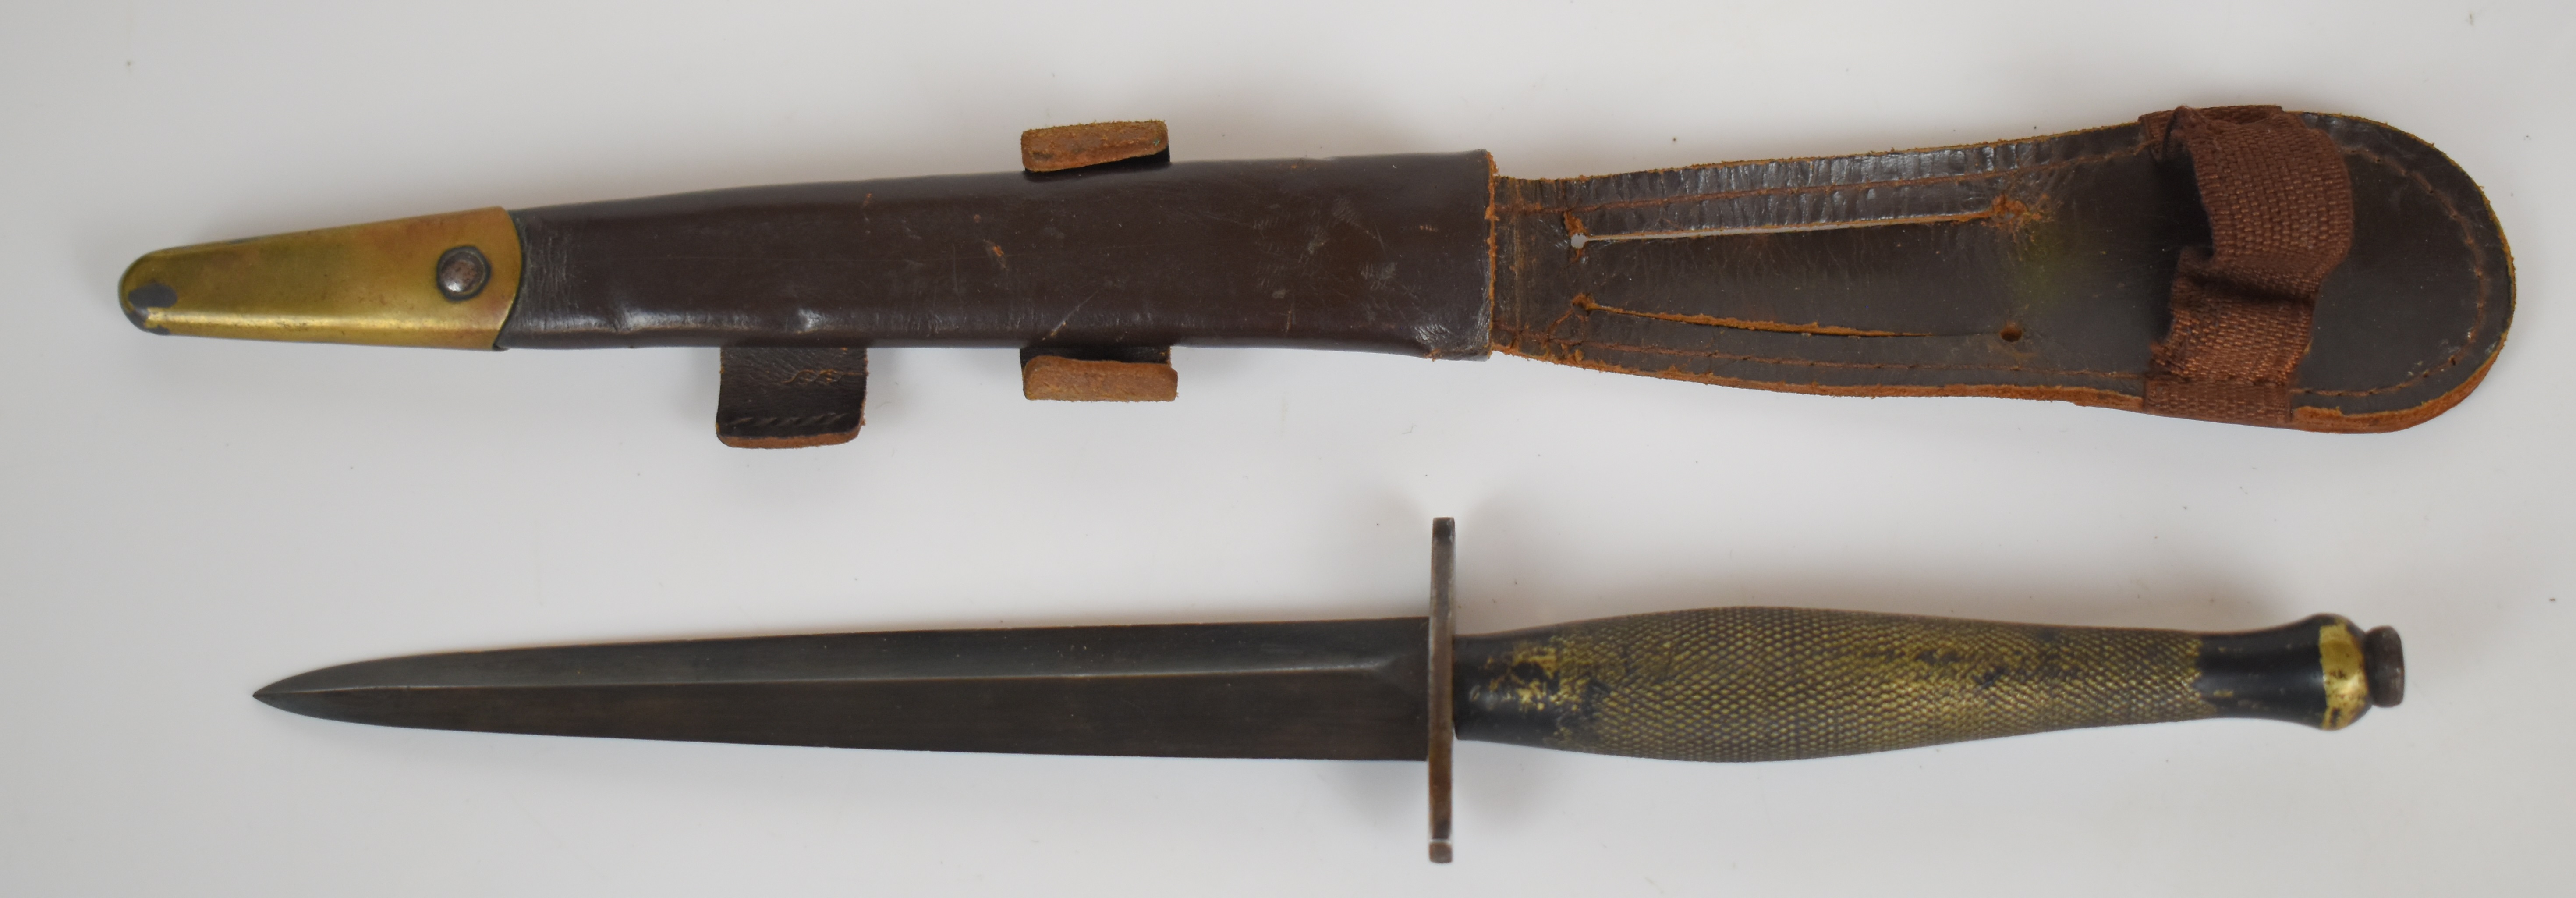 British WW2 Fairbairn Sykes 2nd pattern fighting knife stamped 82 to cross guard, with 16cm blade